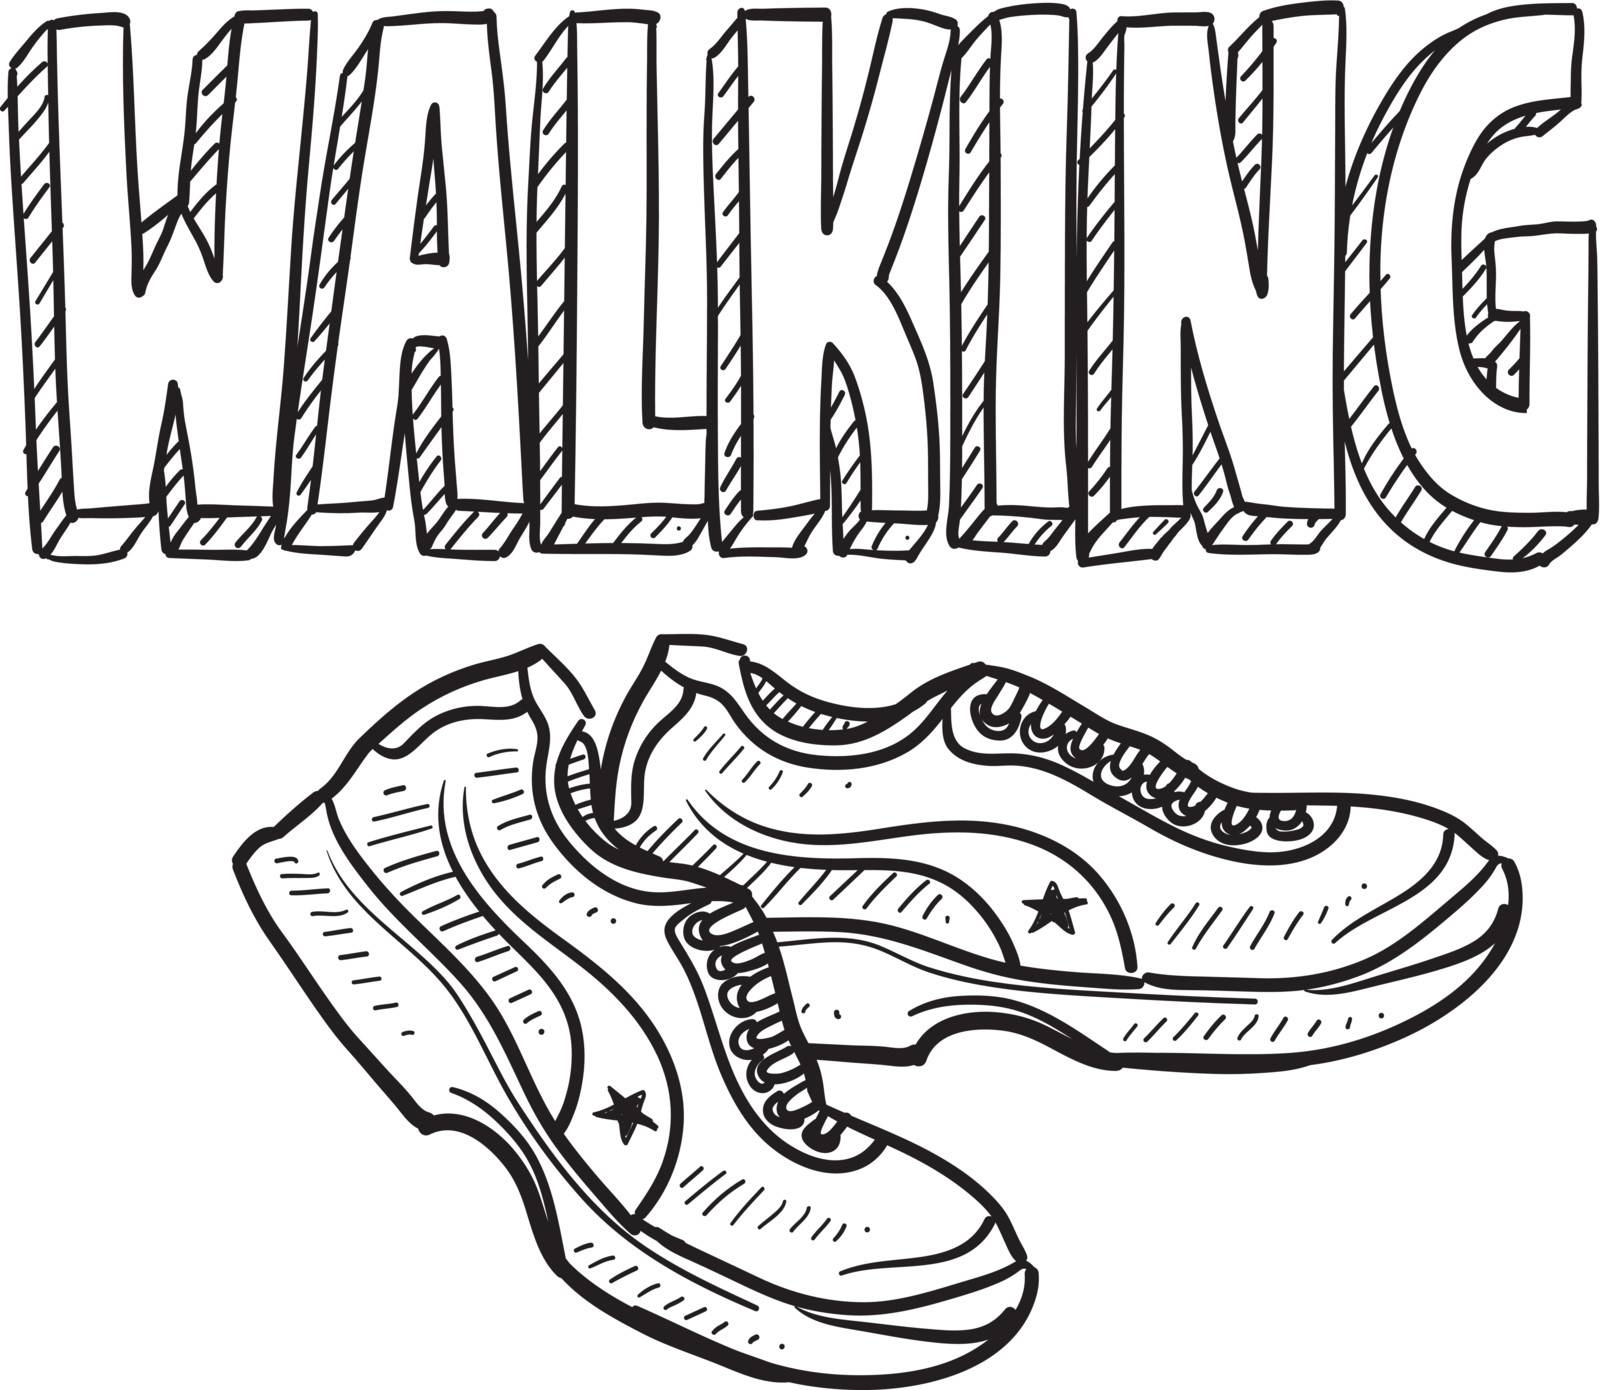 Doodle style walking sports illustration. Includes text and tennis shoes.